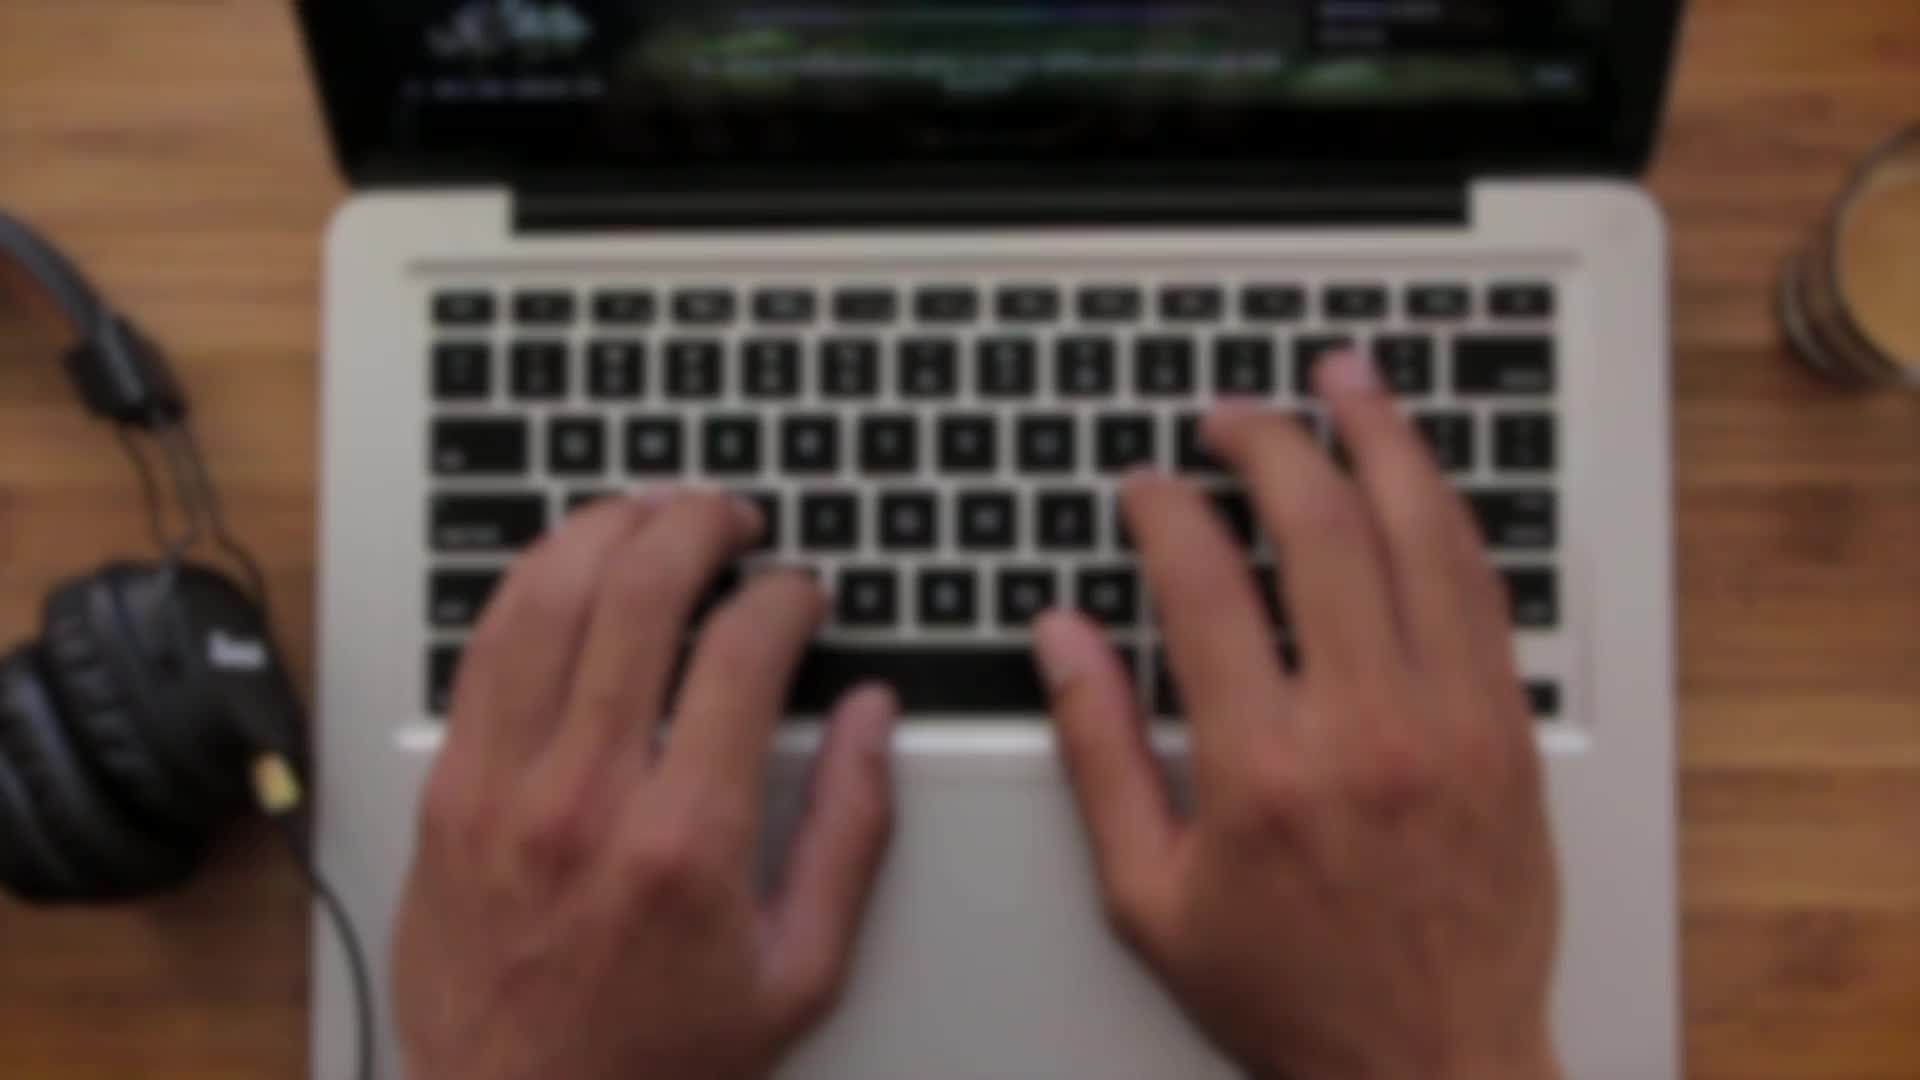 MacMan Typing on a MacBook Pro